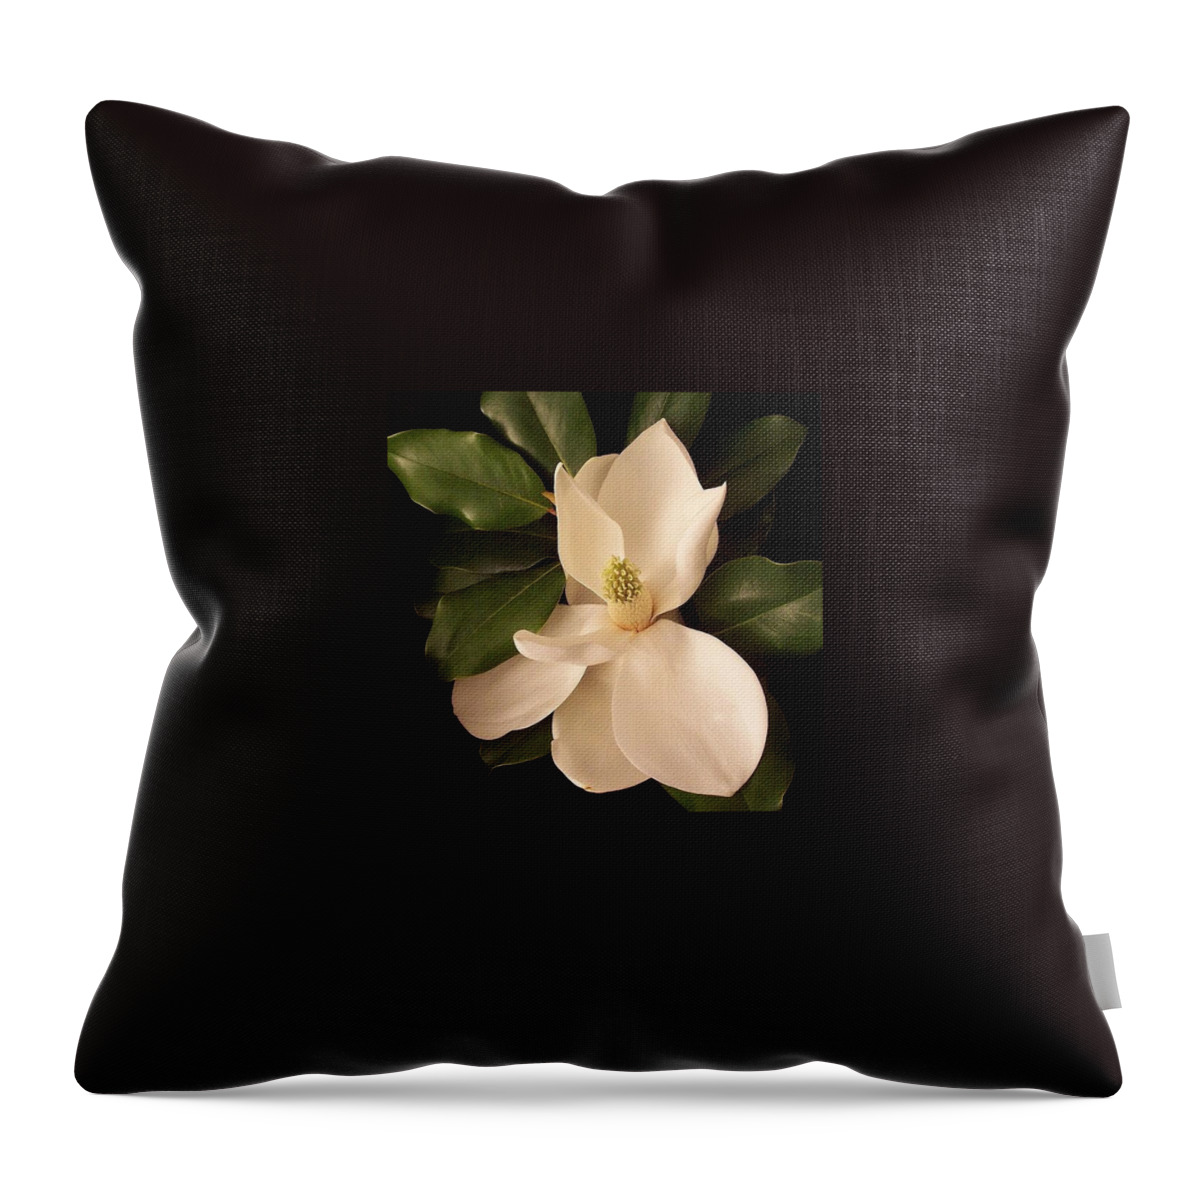  Throw Pillow featuring the photograph Magnolia by Darice Machel McGuire